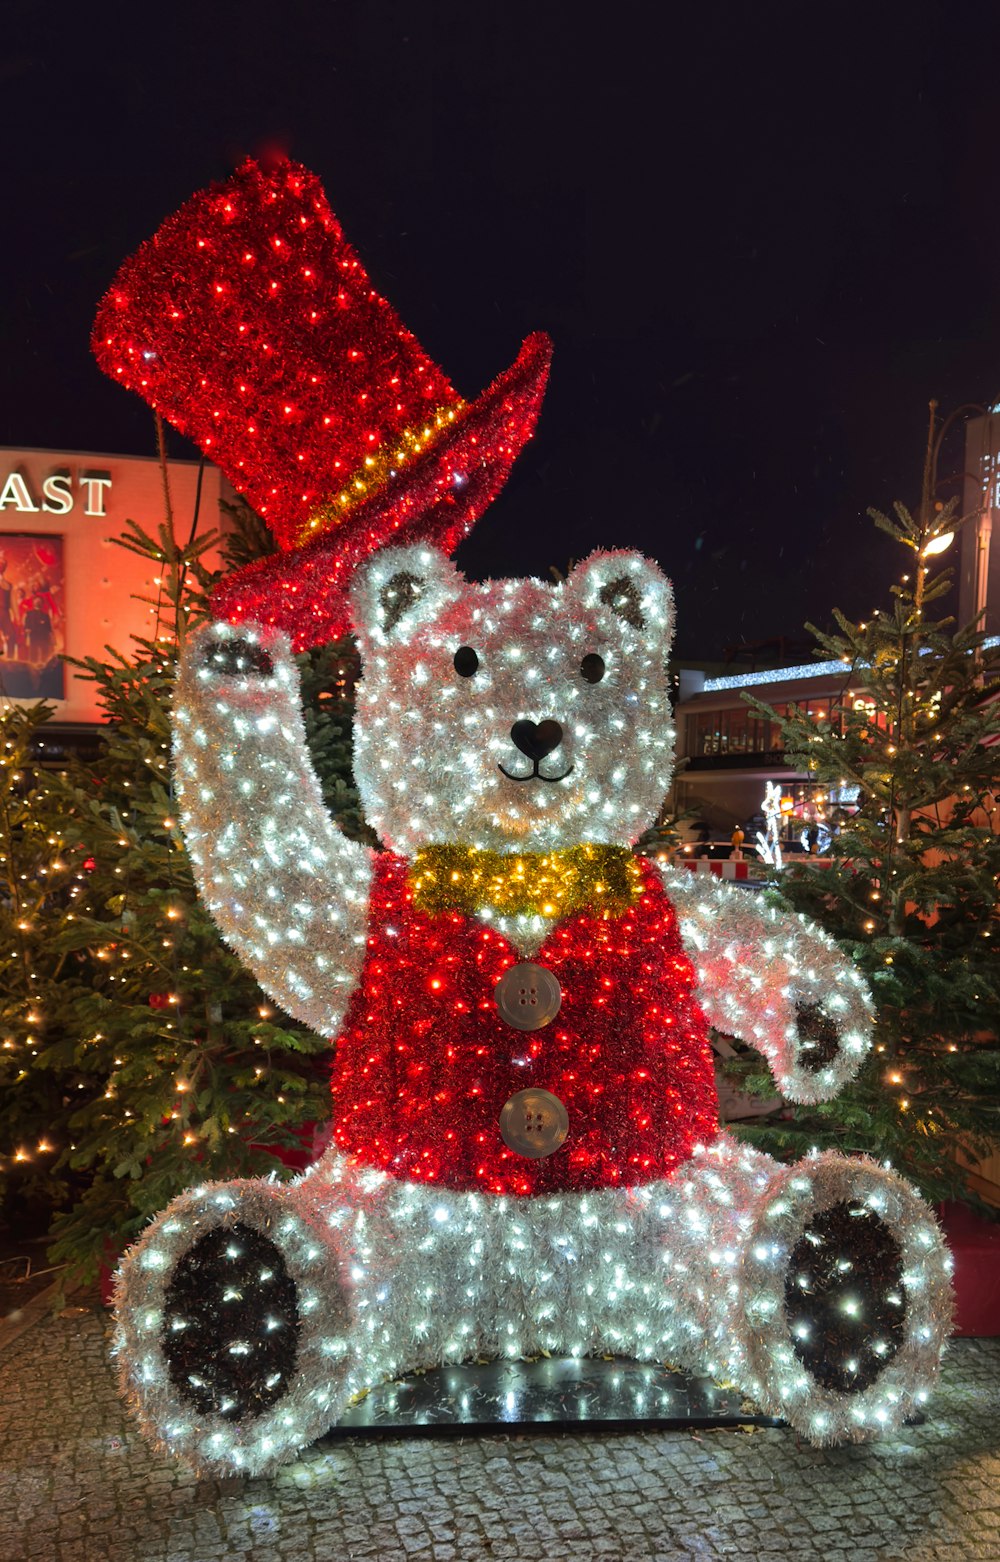 a christmas display of a teddy bear with a top hat